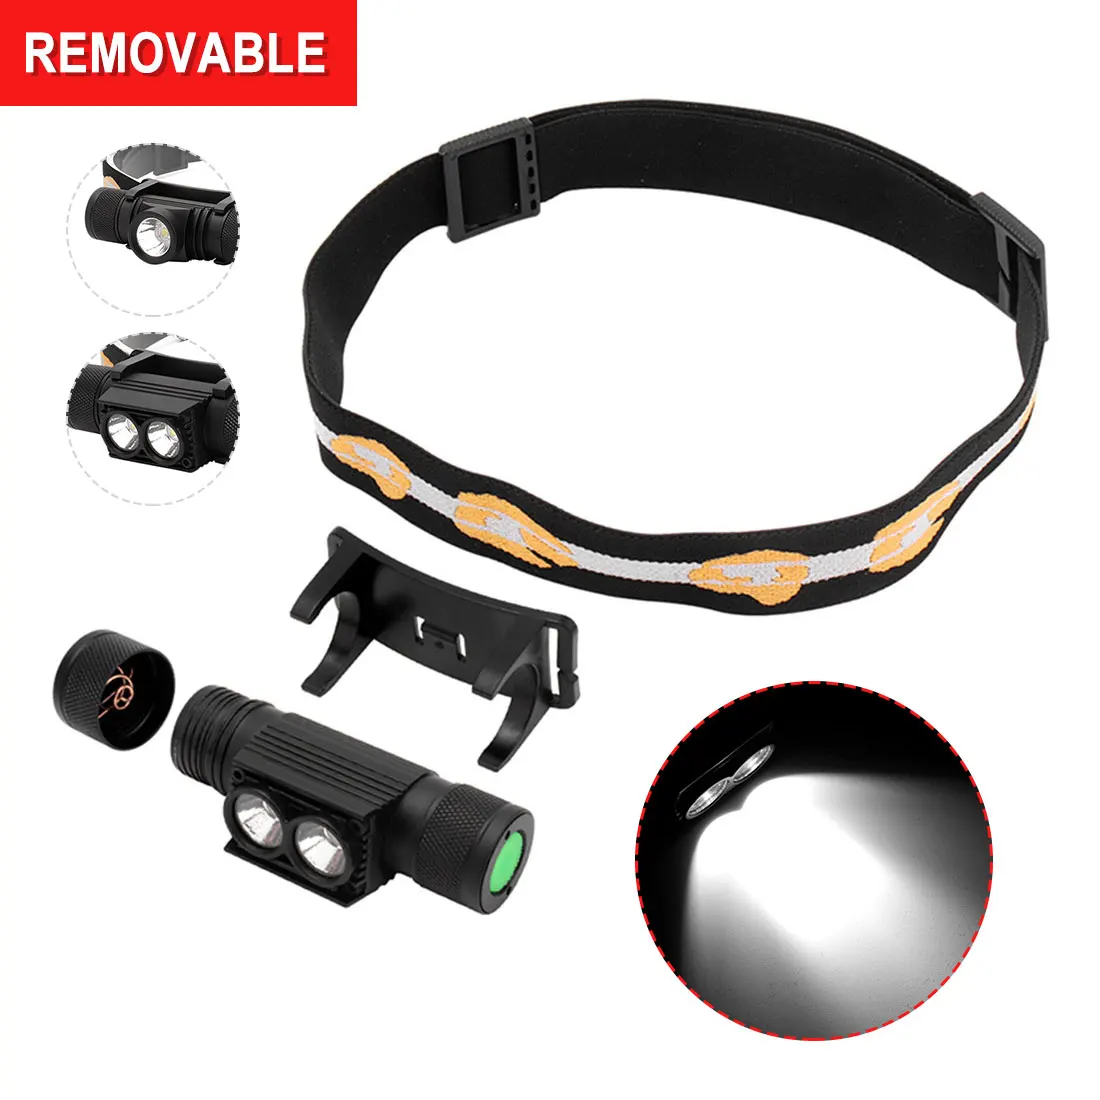 

3800LM XM-L2 LED Headlamp USB Rechargeable Flashlight Power by 18650 Battery Headlight Torch Camping Light Waterproof Work Lamp